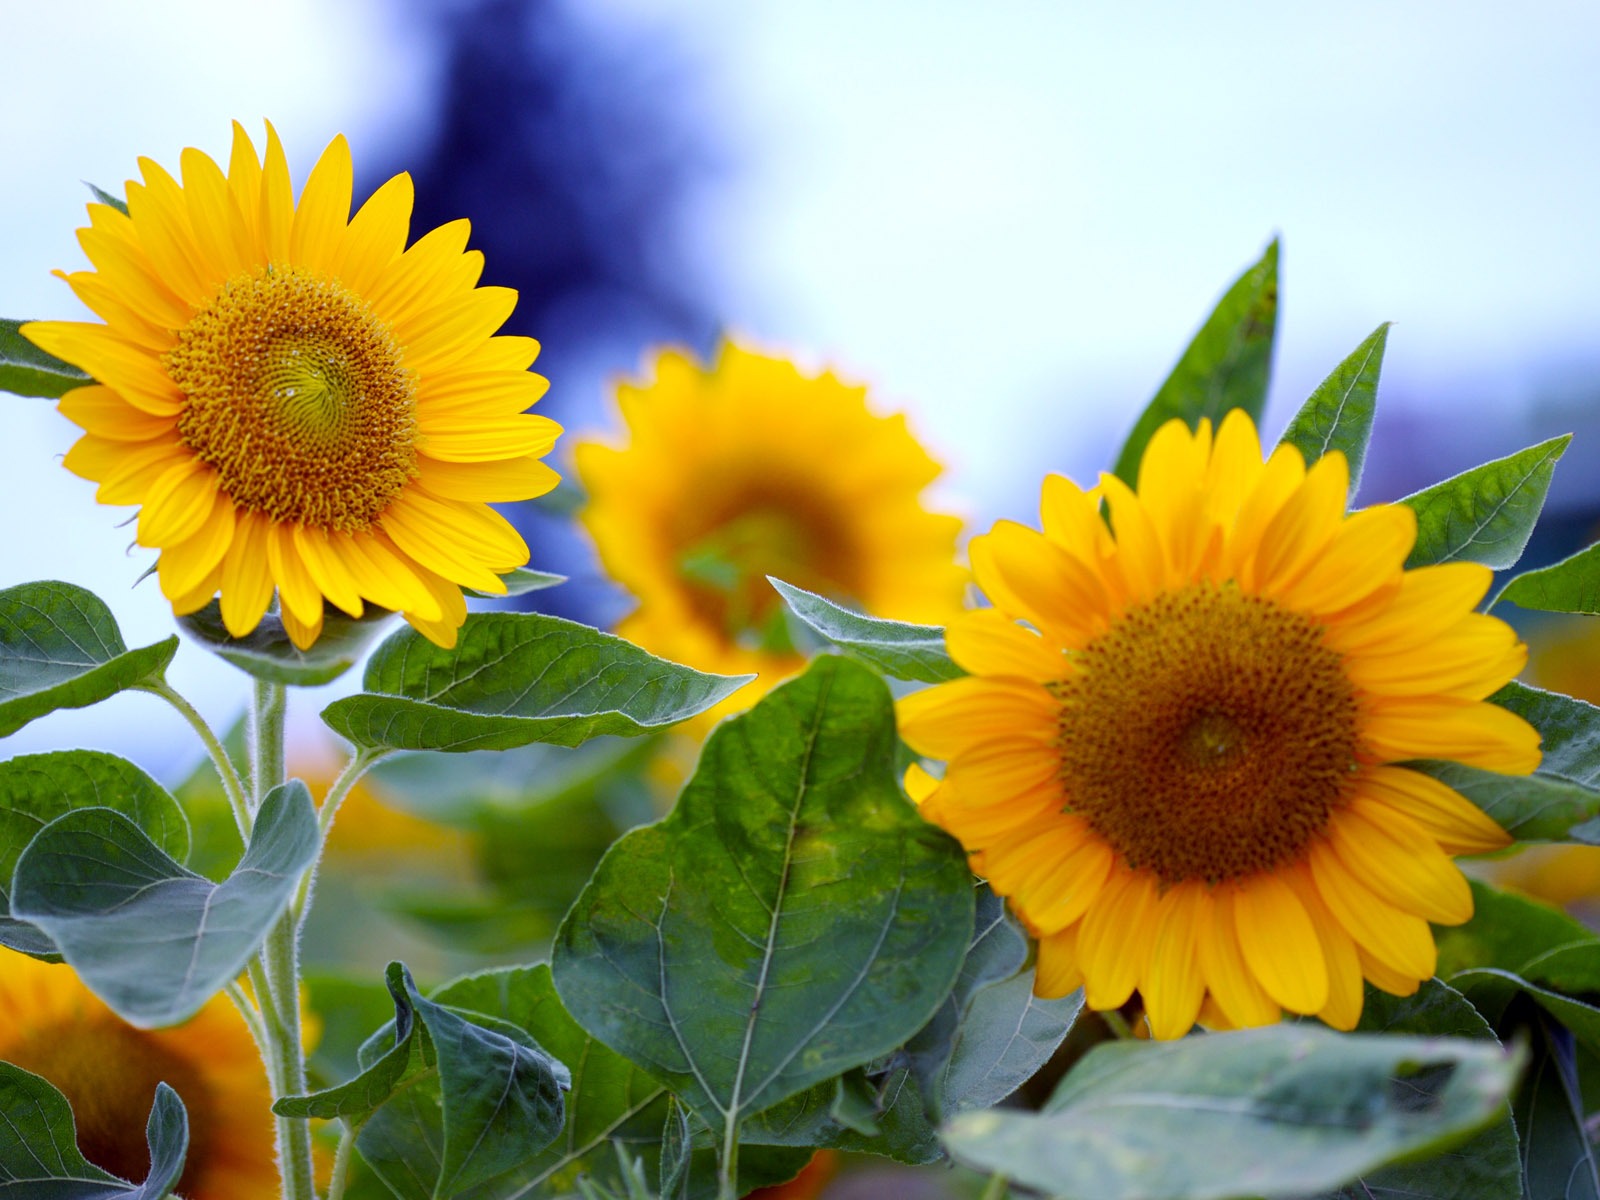 Sunny sunflower photo HD Wallpapers #23 - 1600x1200